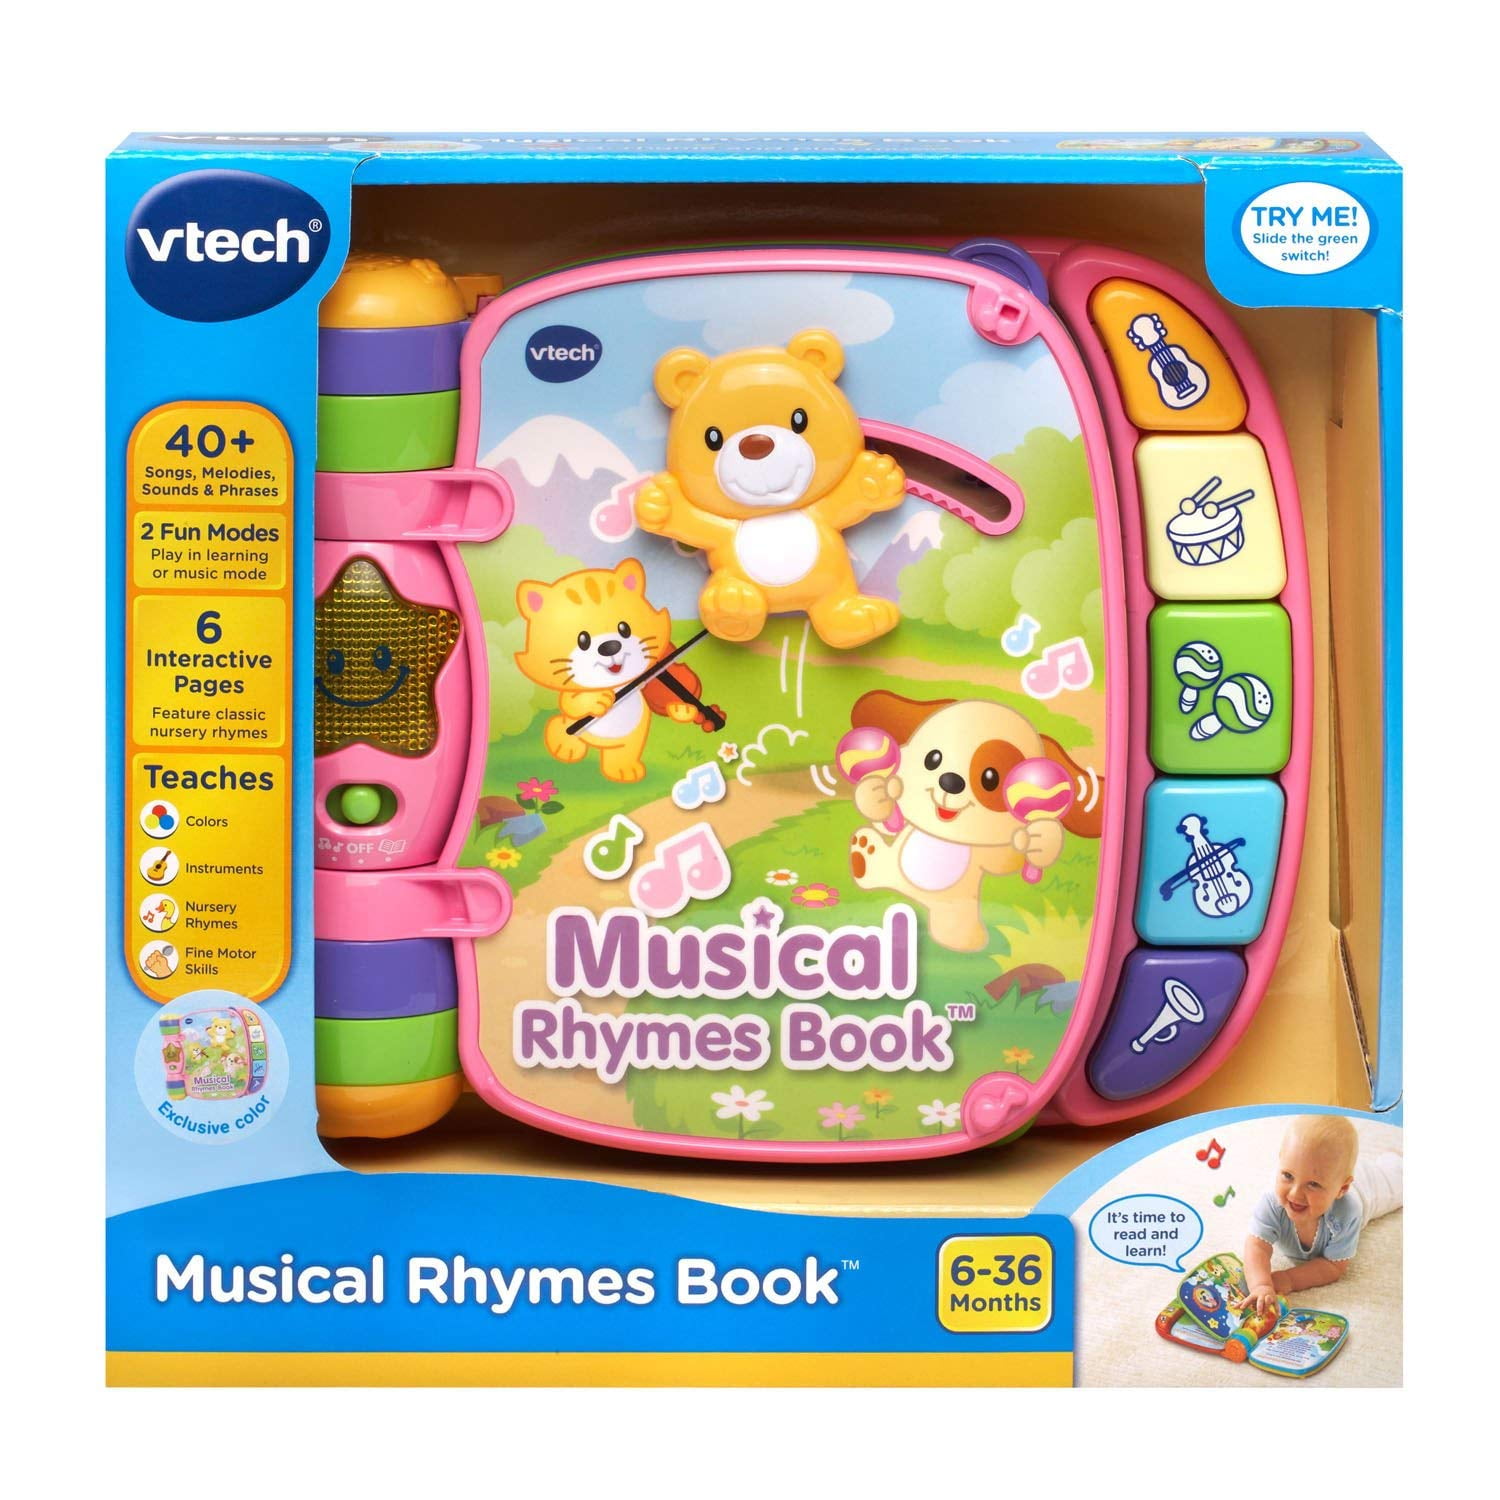 Sounds & Phrases 6-36 Mos New 40+ Songs Melodies VTech Musical Rhymes Book 